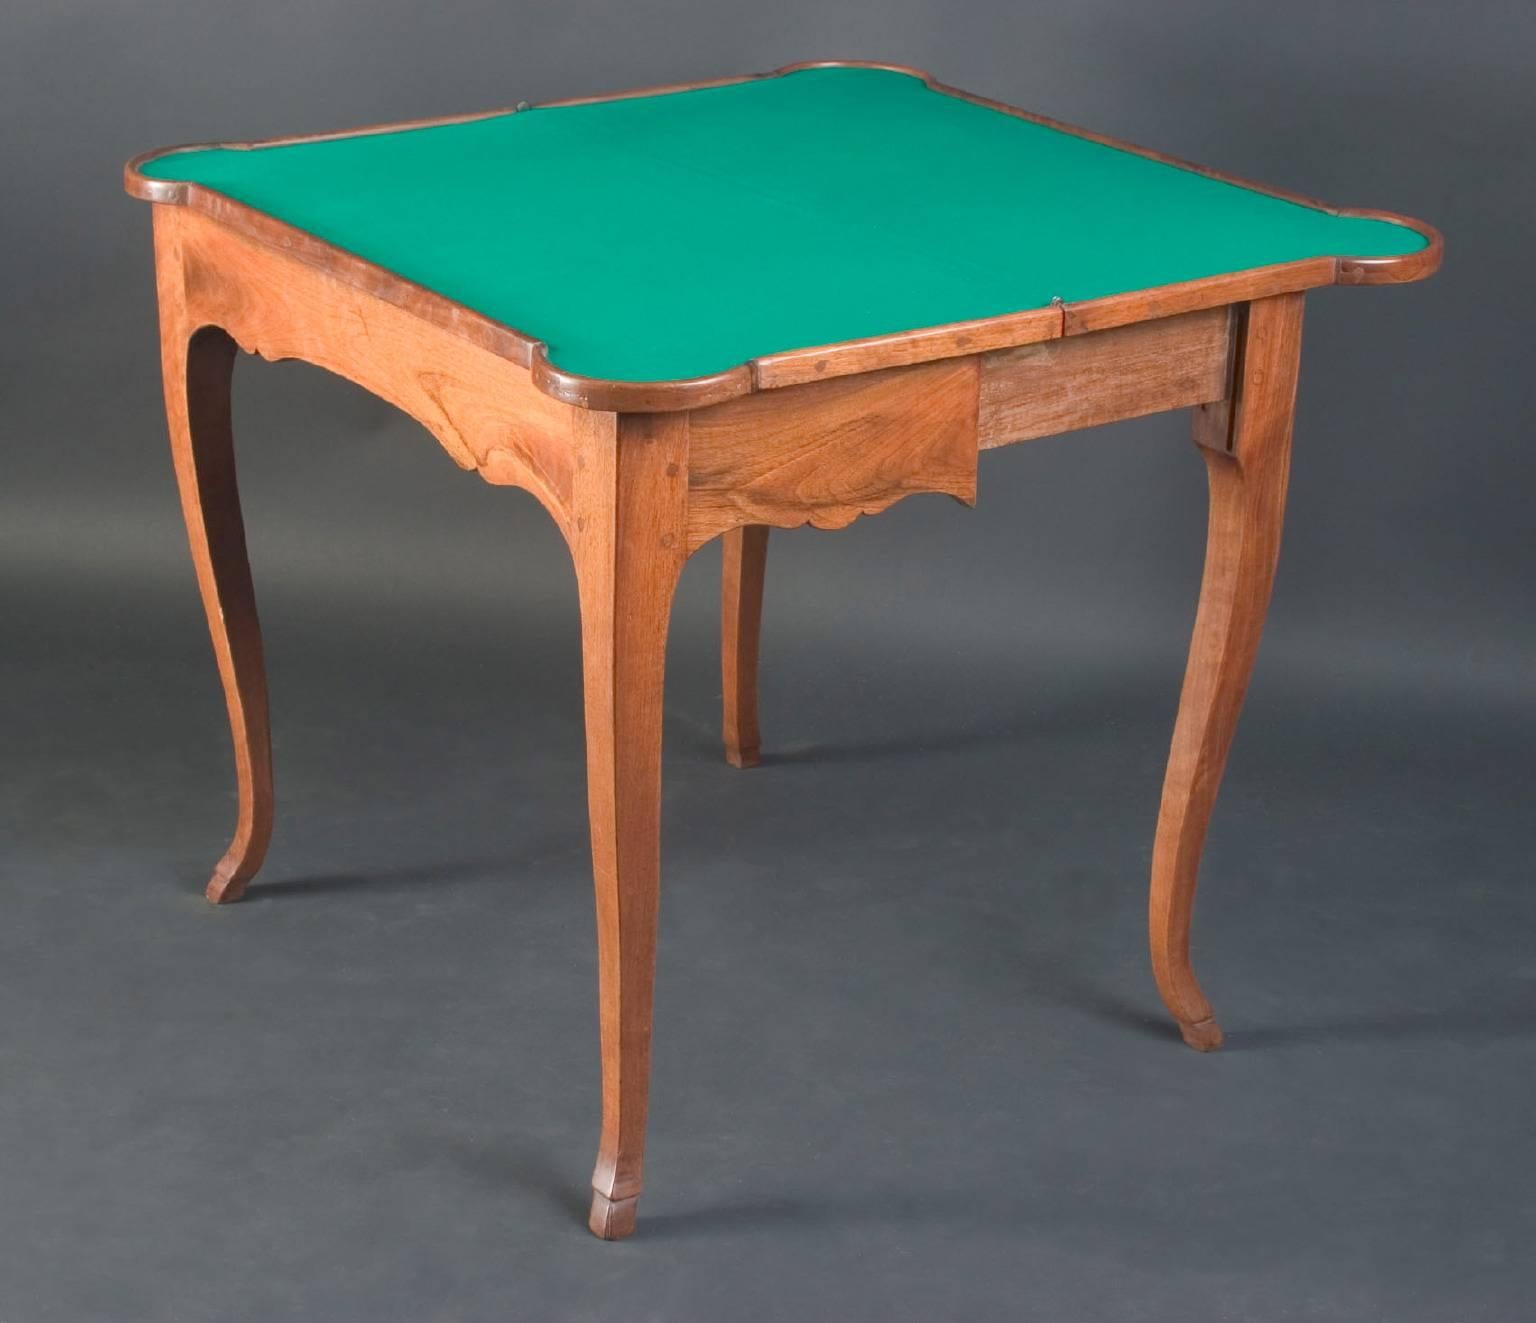 French 18th Century Louis XV Expanding Game Table, Signed “Hache a Grenoble” For Sale 2